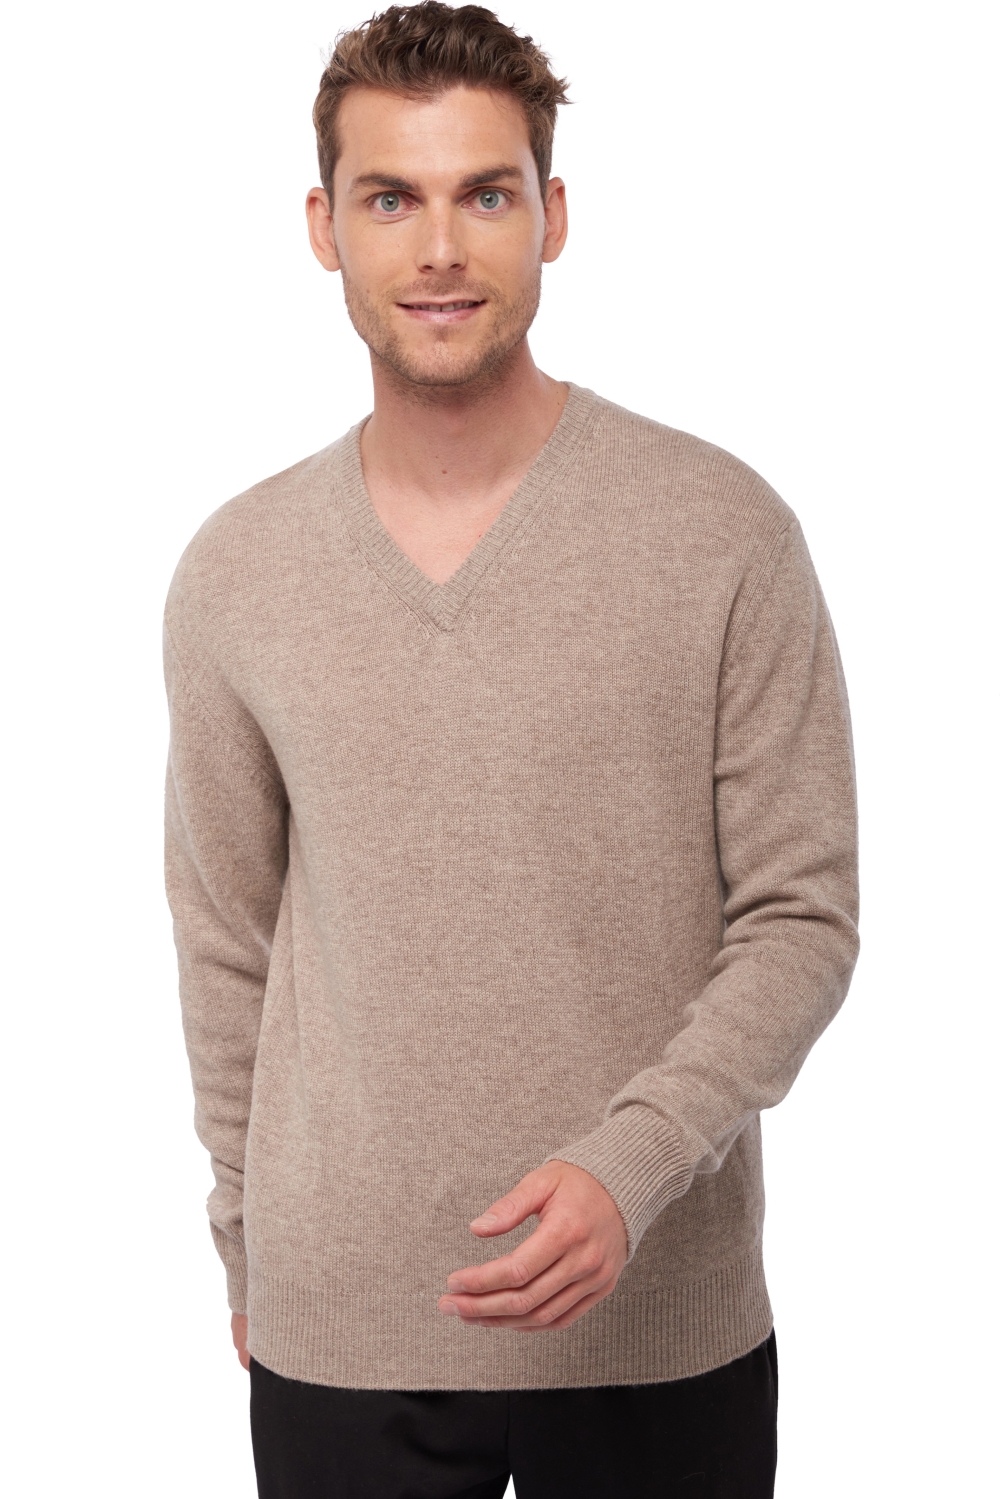 Cachemire pull homme hippolyte 4f toast 4xl